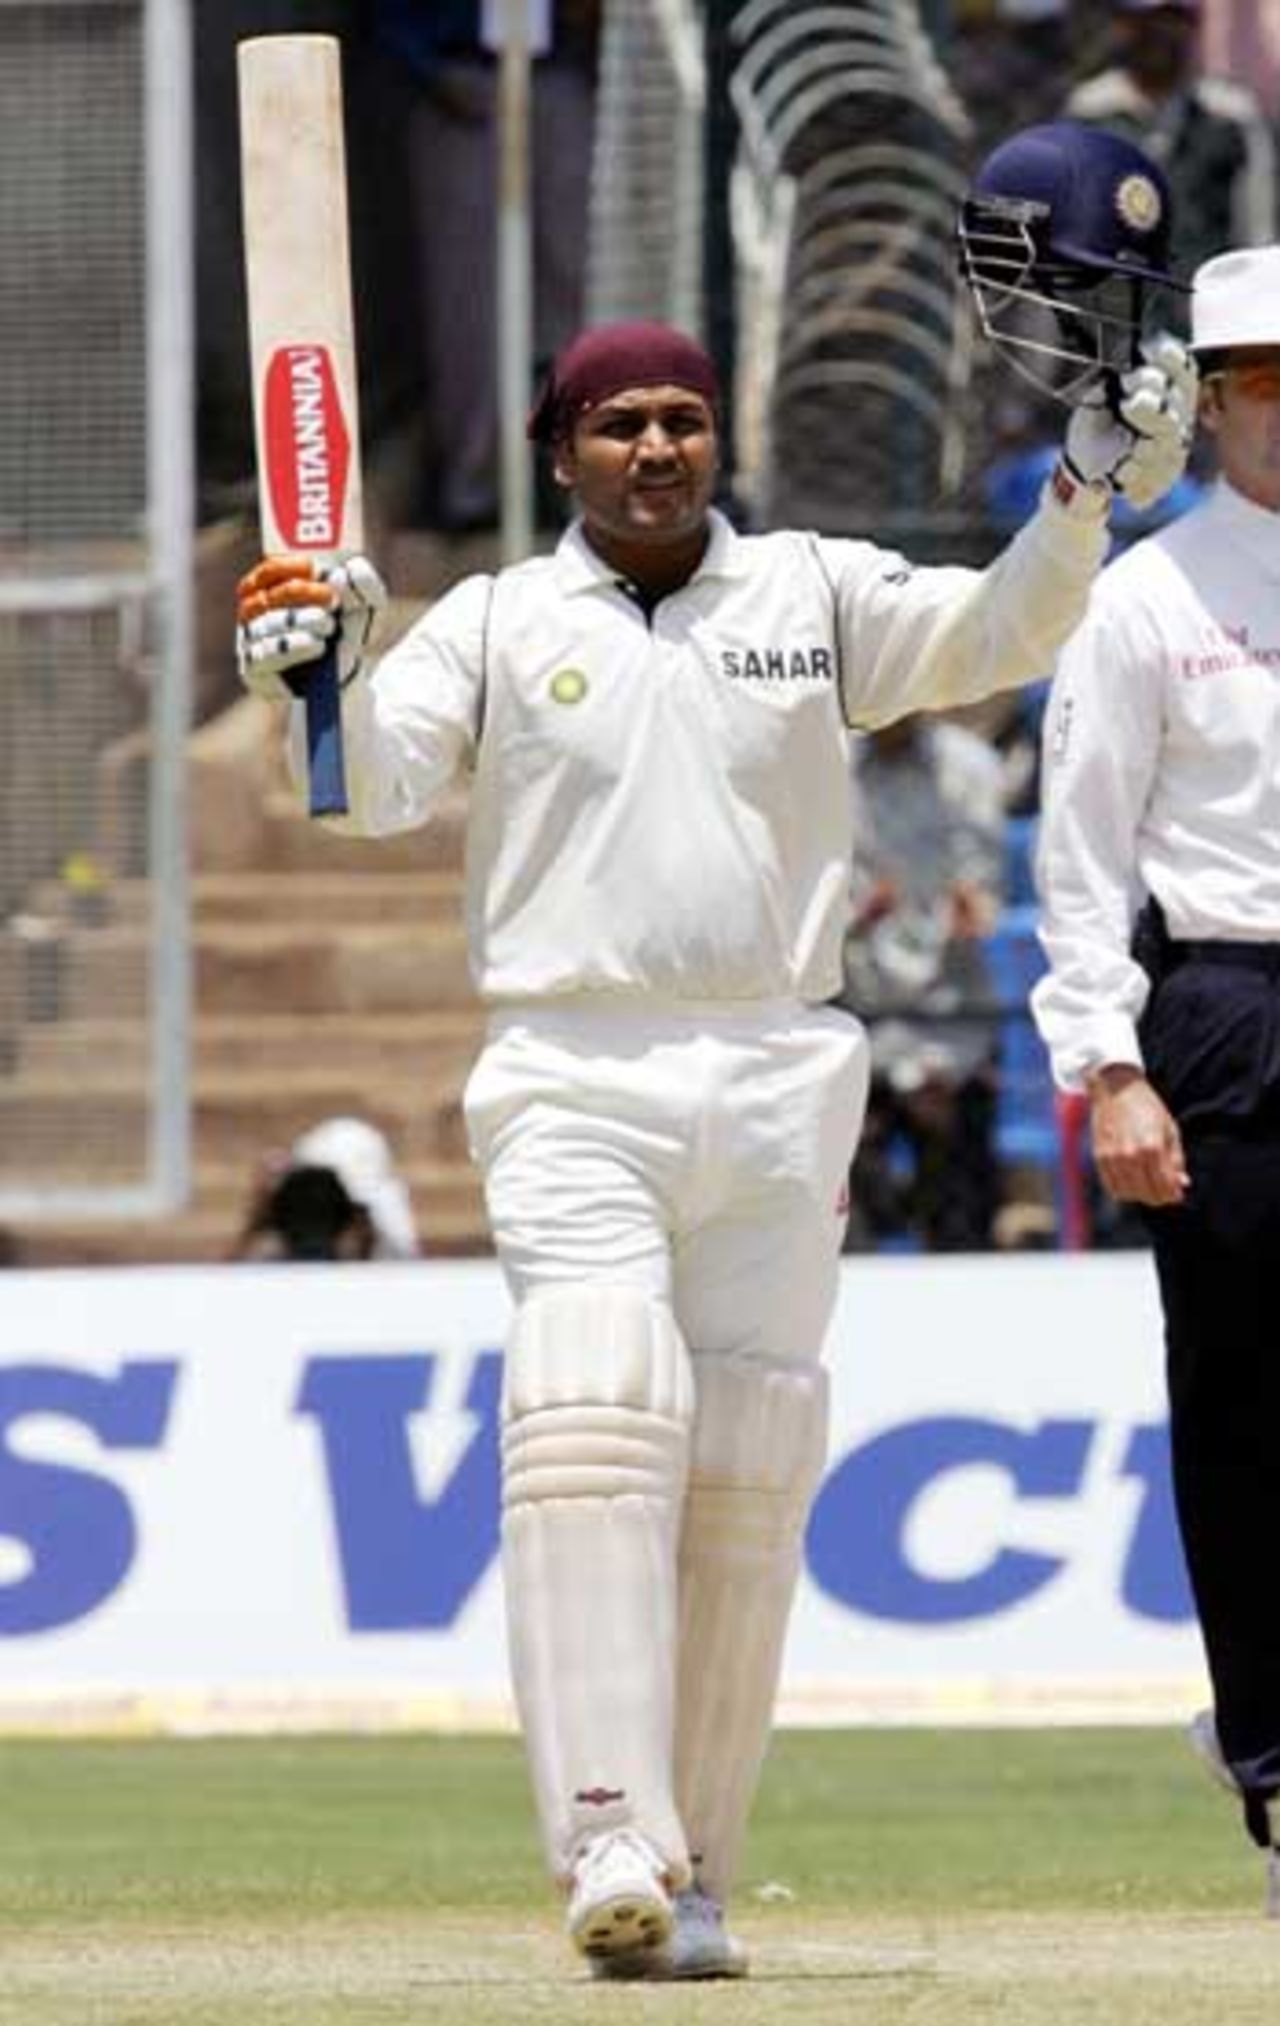 Virender Sehwag raises his bat to the crowd after reaching his century, India v Pakistan, 3rd Test, Bangalore, 3rd day, March 24, 2005